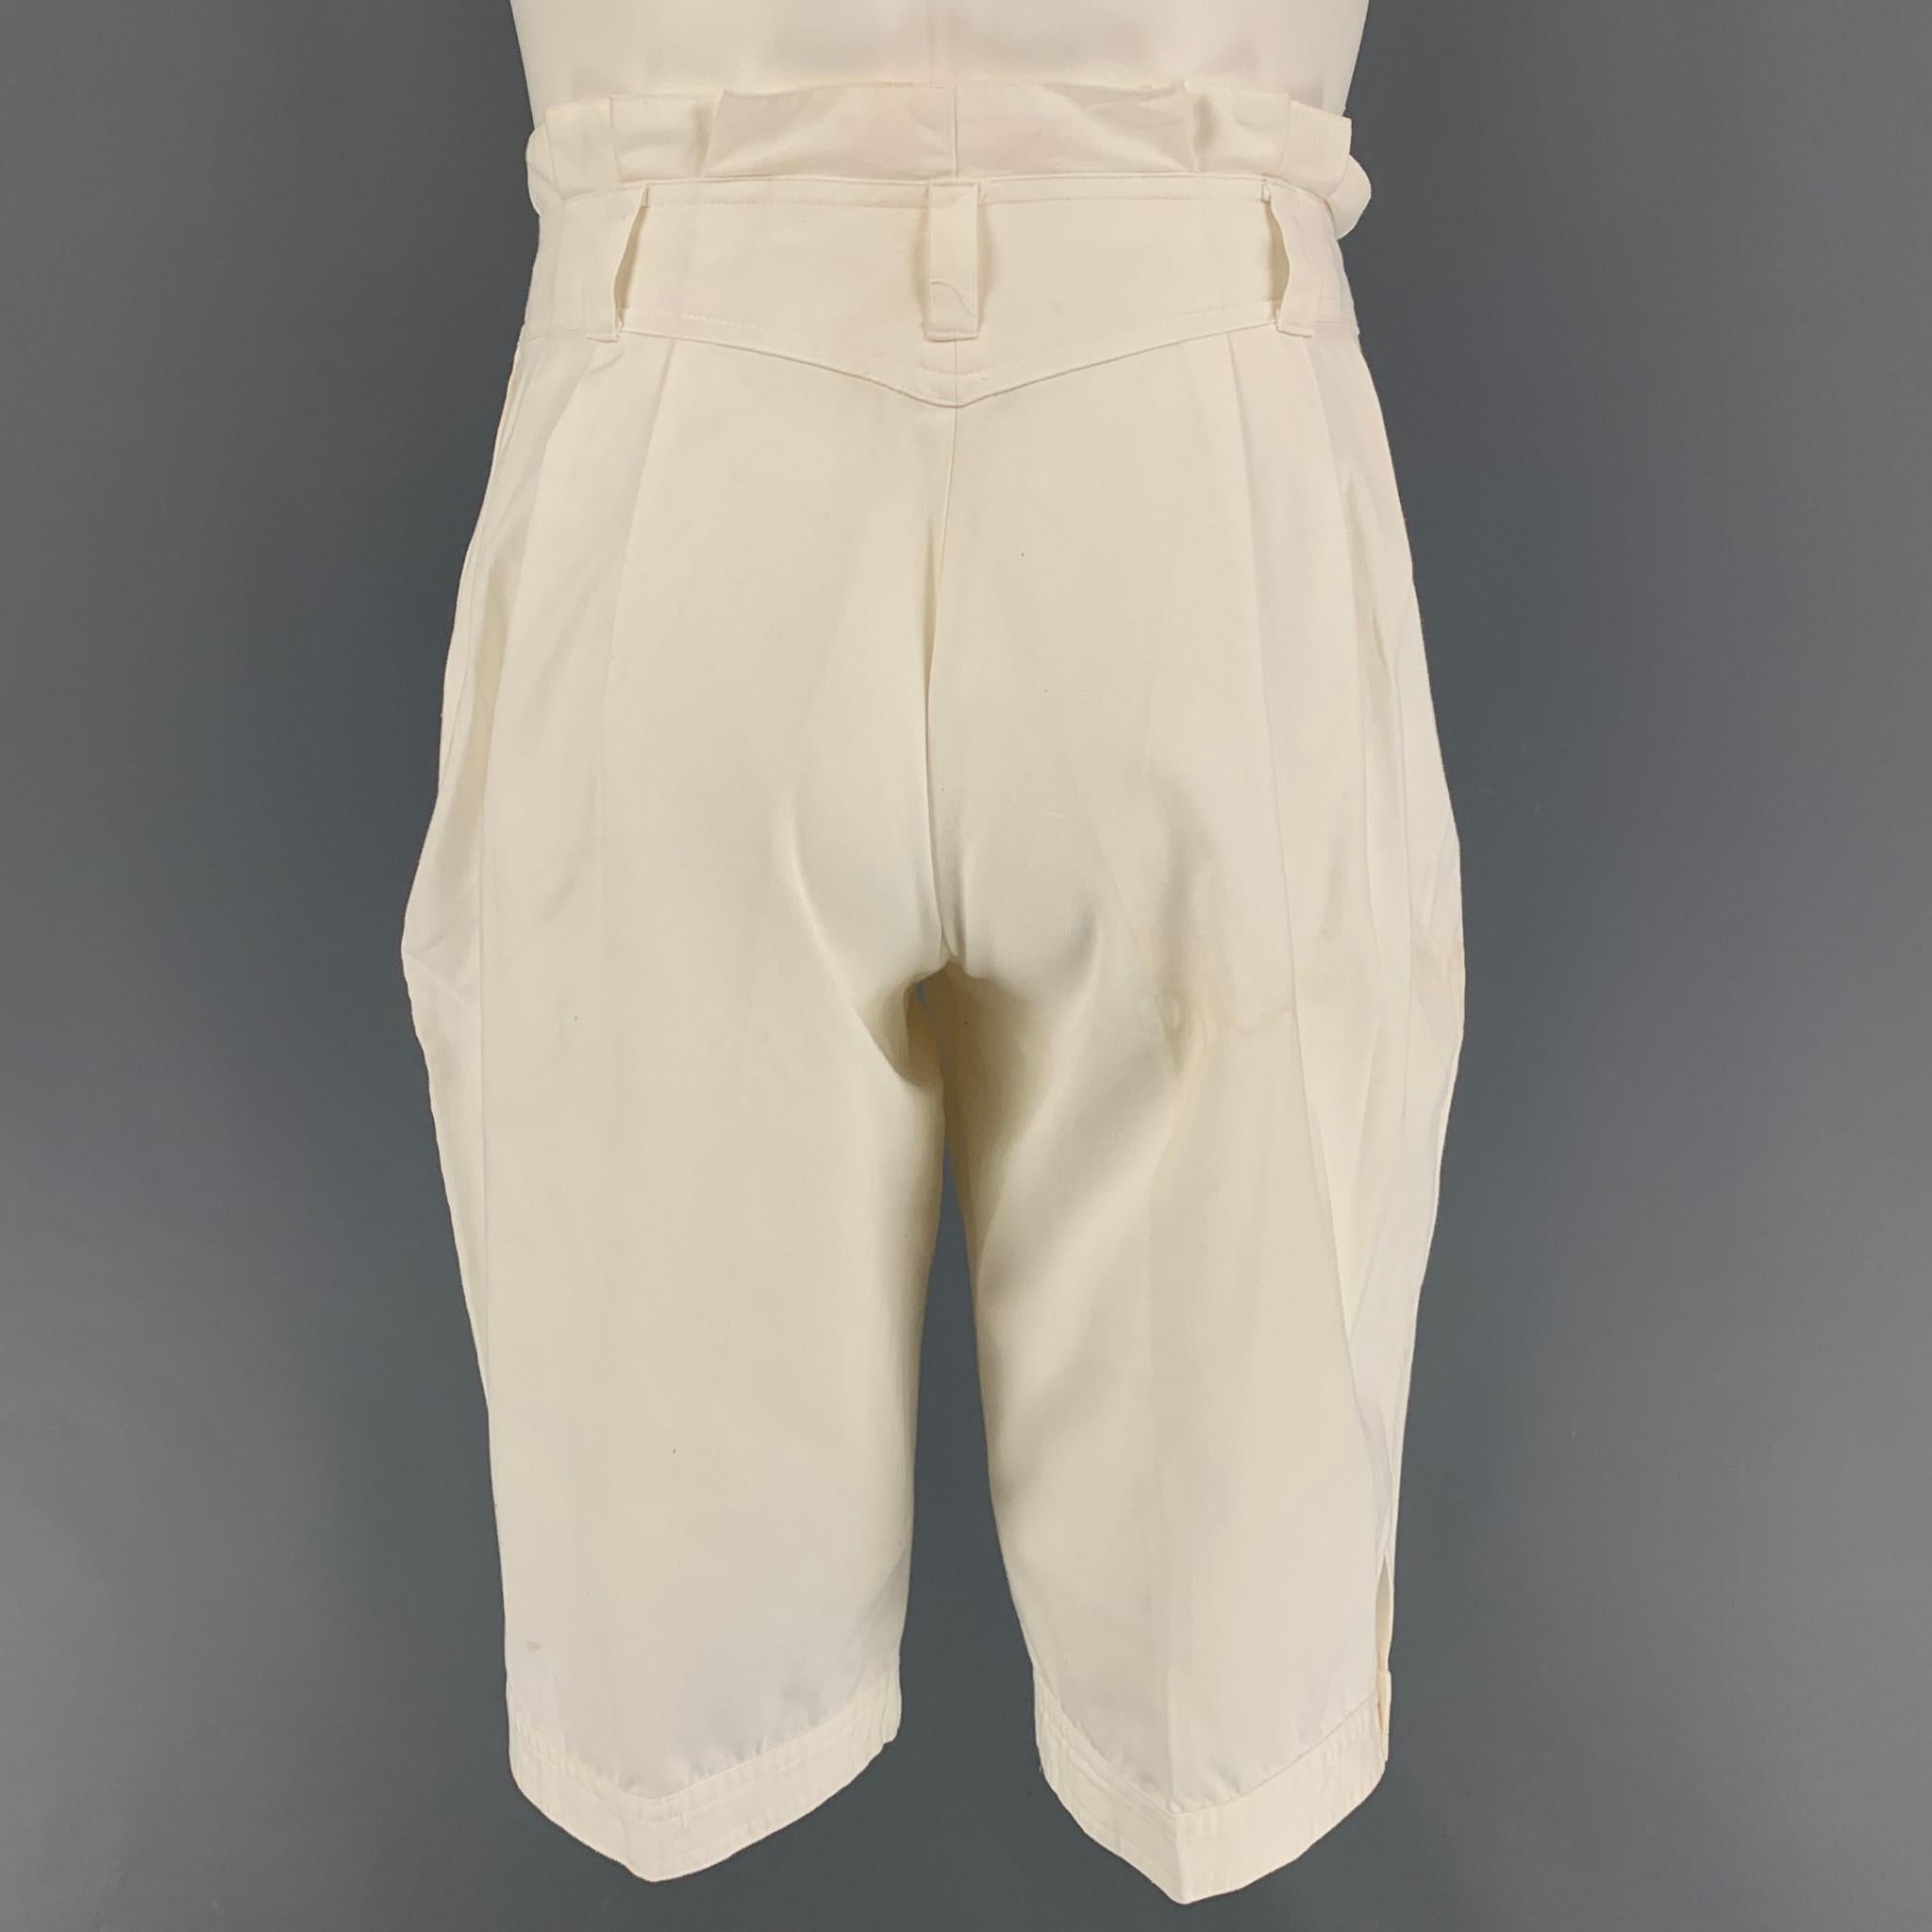 Vintage KANSAI YAMAMOTO shorts comes in a white cotton featuring a pleated style, ruffled trim, snap button details, zip fly, and a double snap button closure. Made in Japan. 

Good Pre-Owned Condition. Minor mark at leg.
Marked: